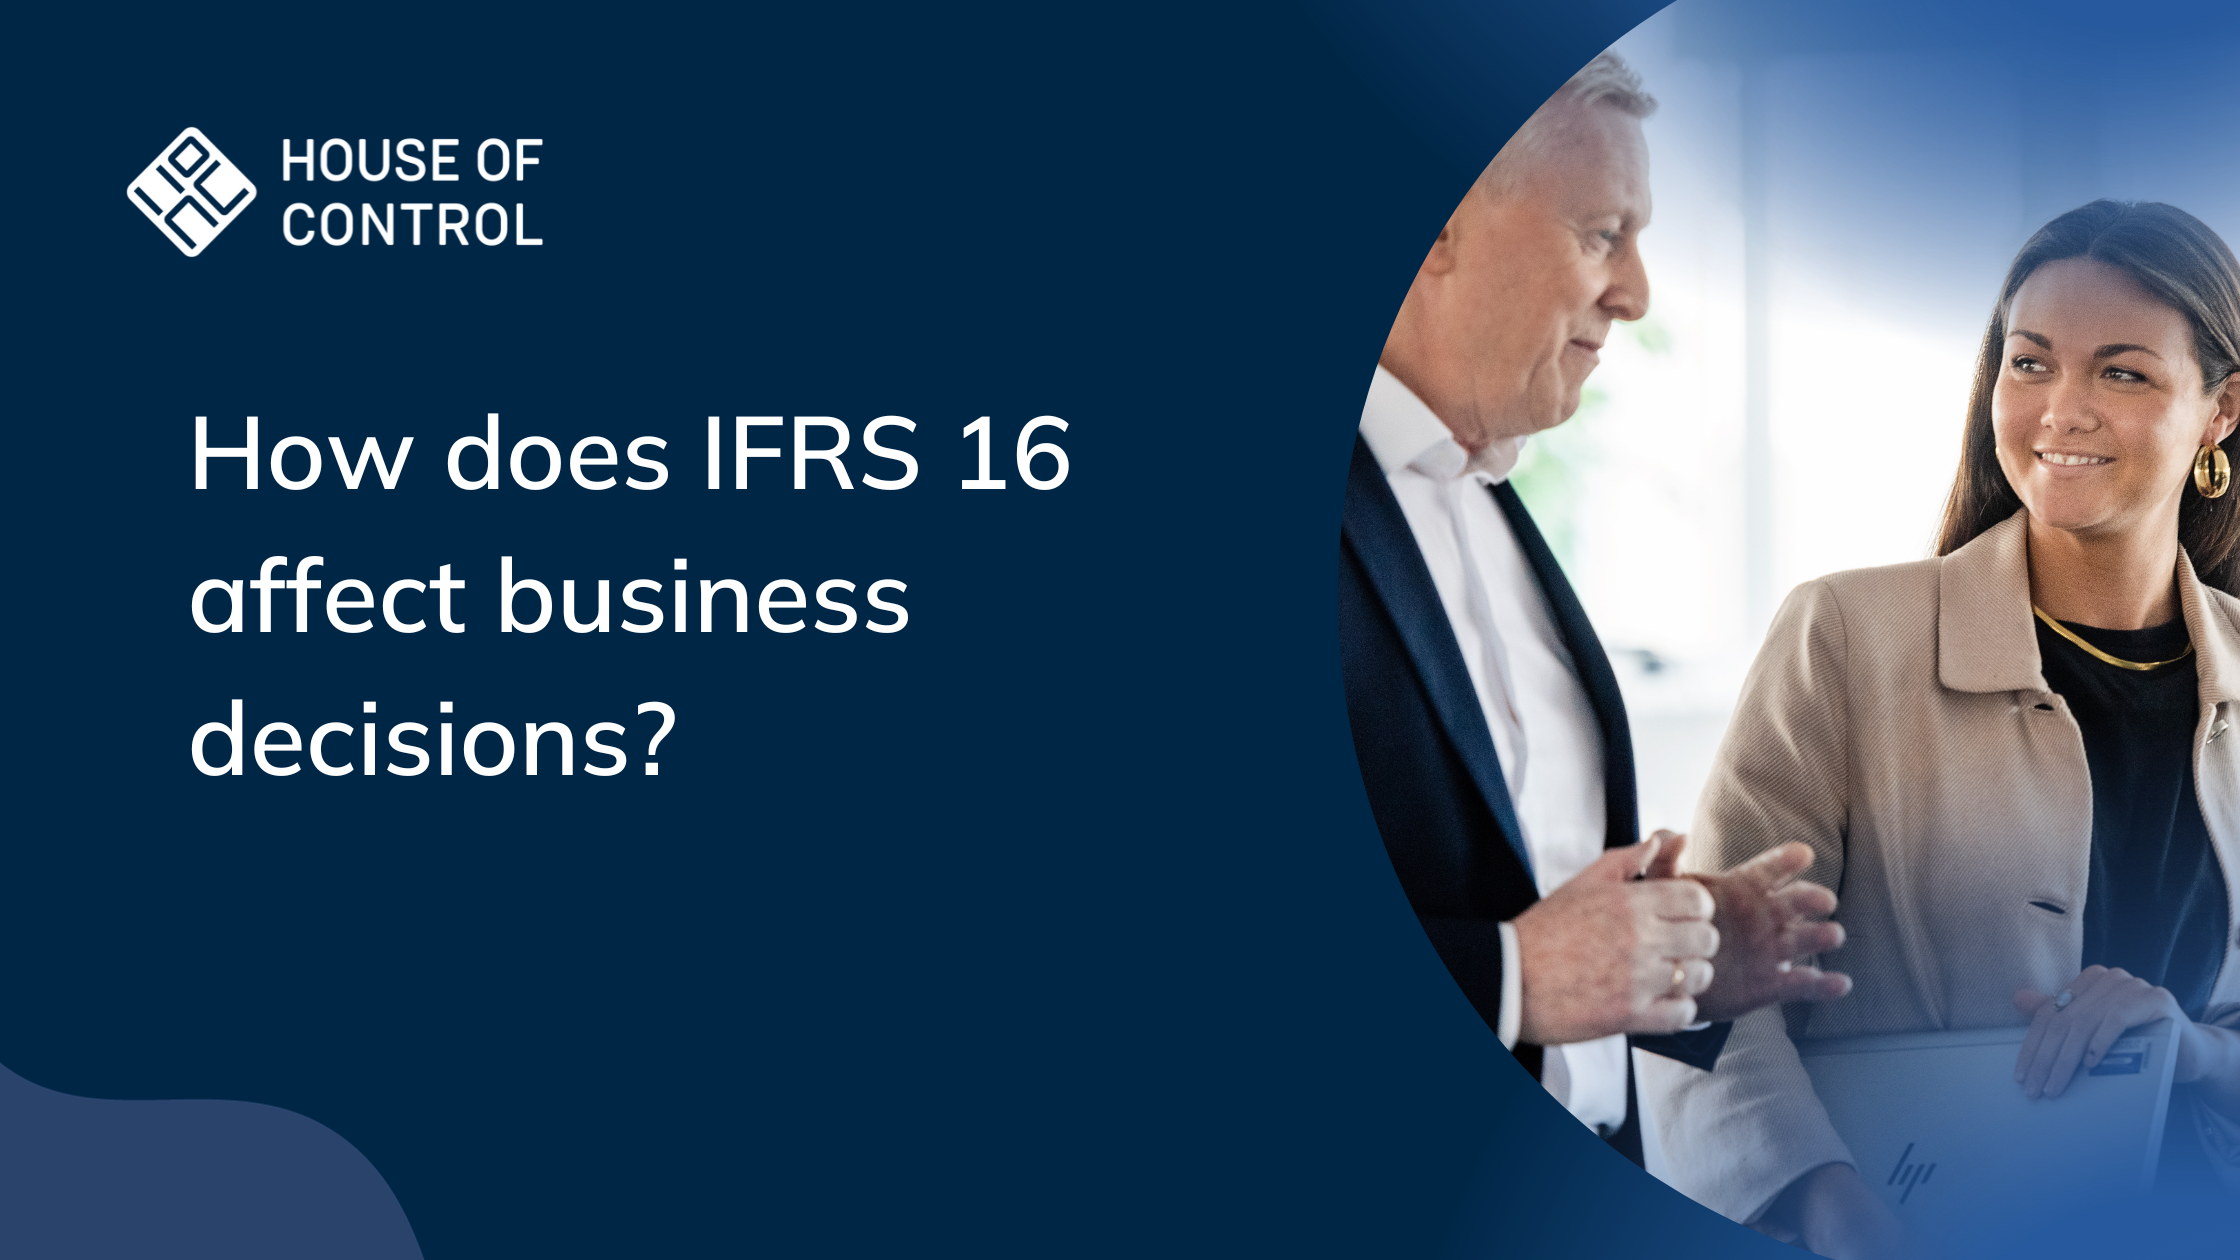 How does IFRS 16 affect business decisions